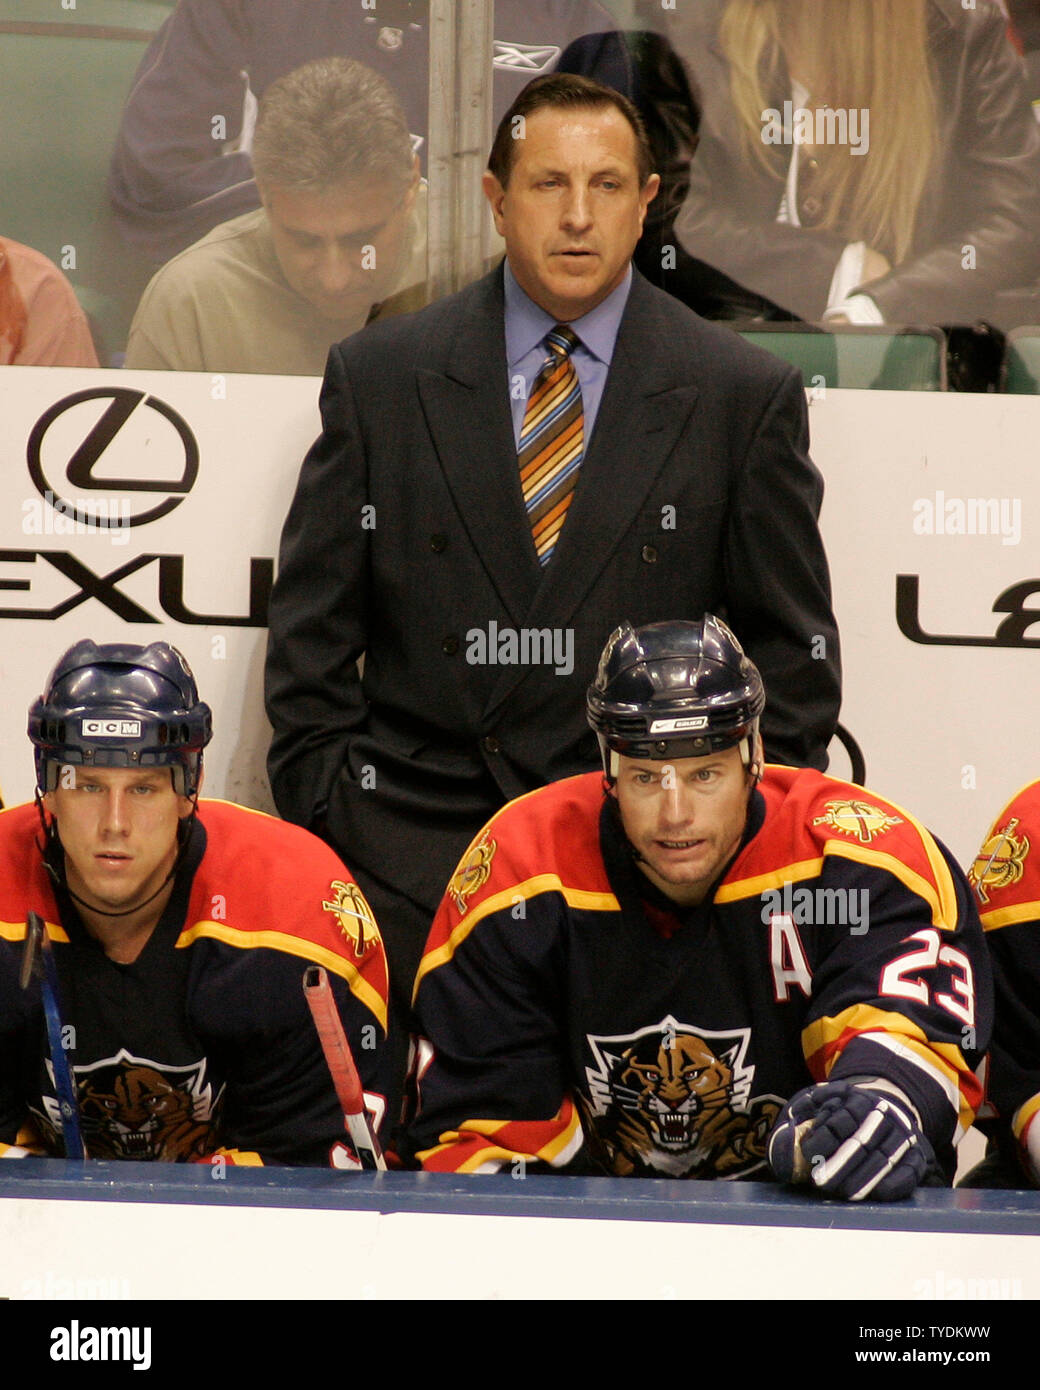 Florida Panthers head coach Jacques Martin watches as his team loses to the San Jose Sharks 2-1 at the Bank Atlantic Center in Sunrise, Florida on October 31, 2006. (UPI Photo/Michael Bush) Stock Photo